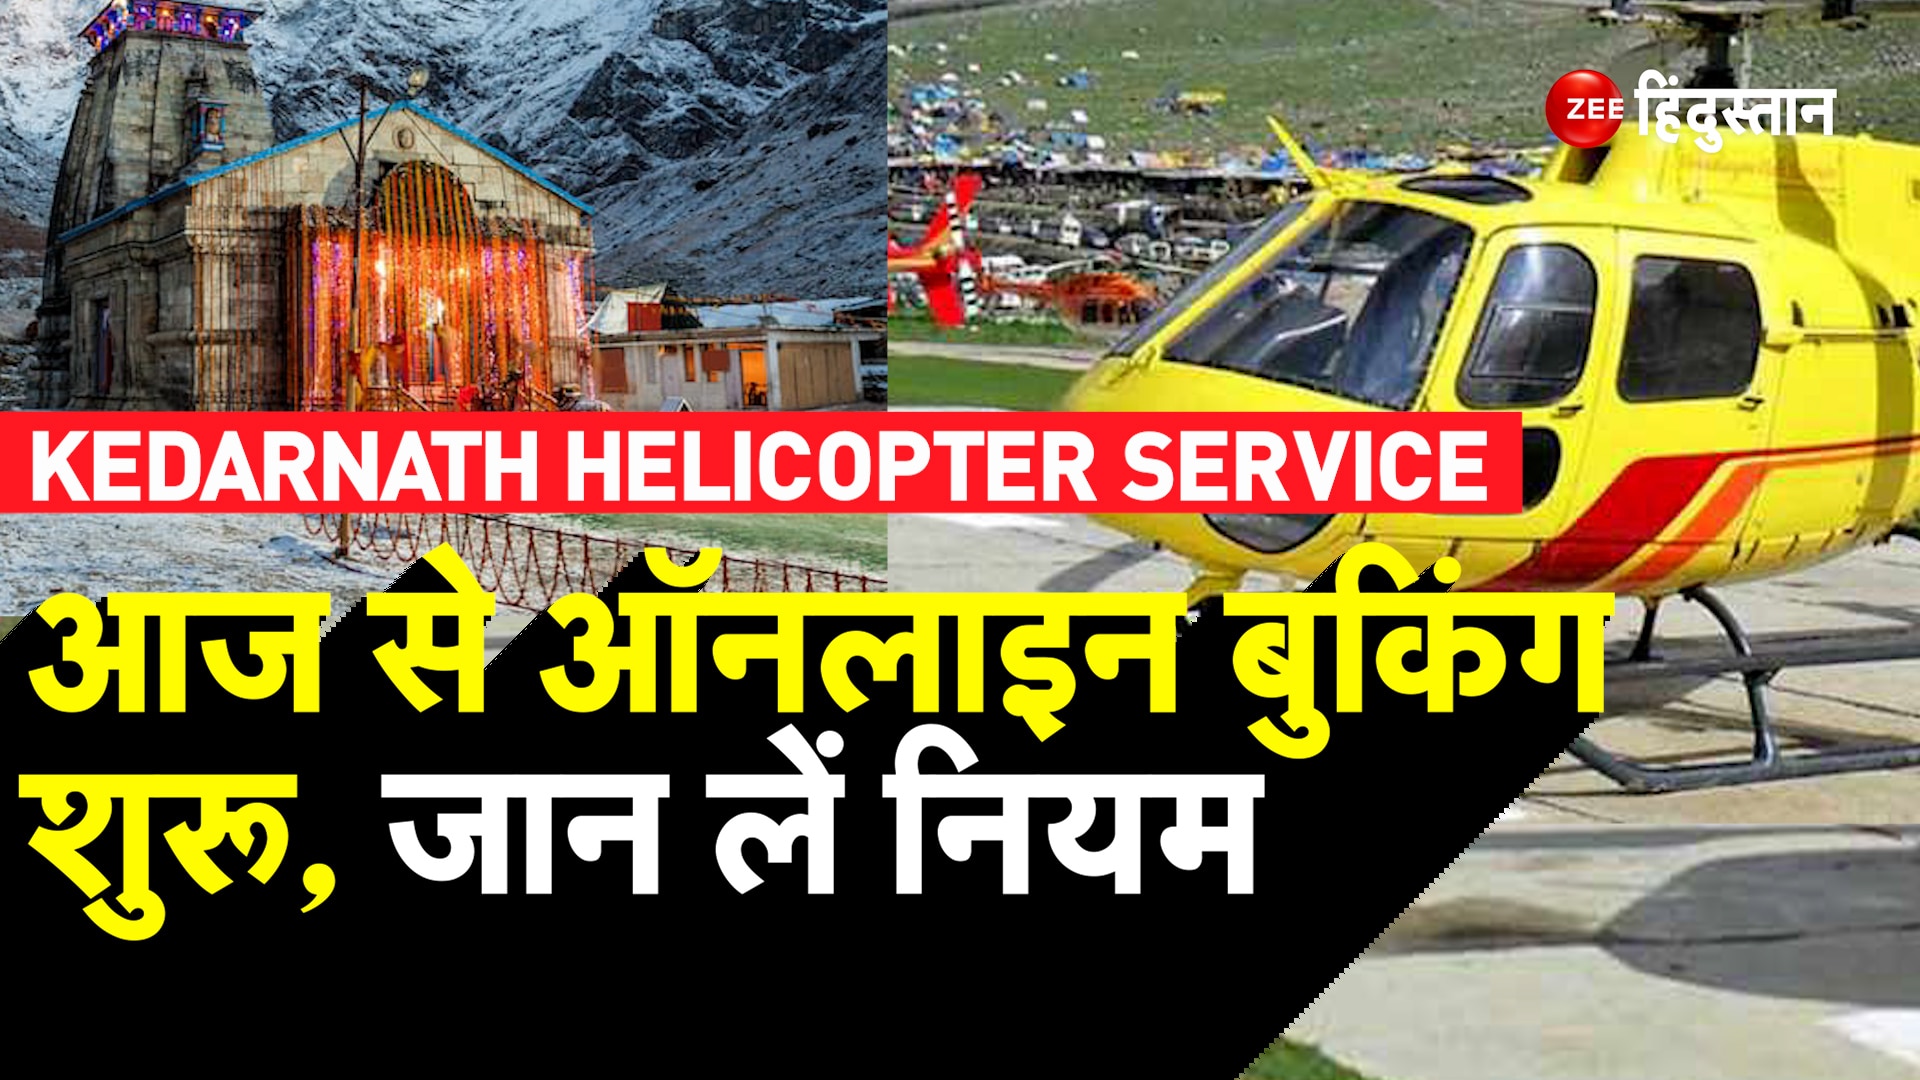 Kedarnath Helicopter online booking Service will start from today know